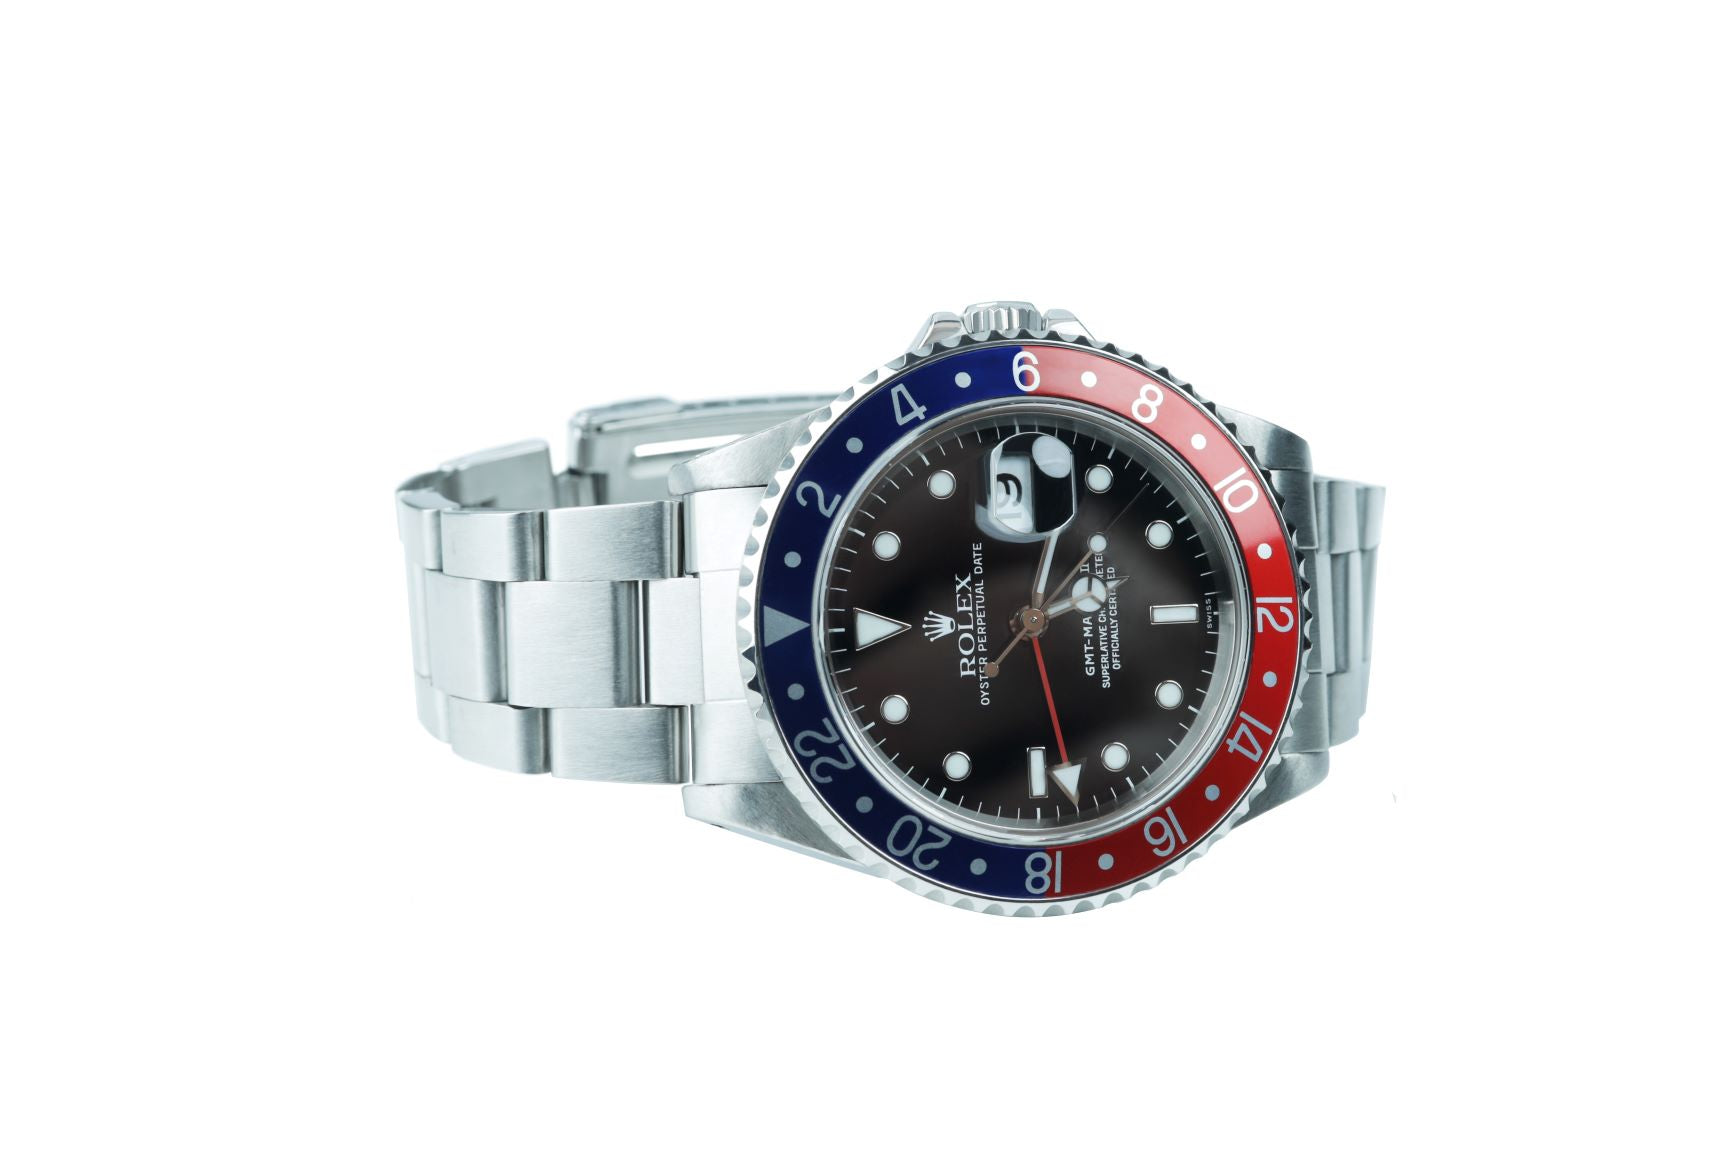 Pre-Owned GMT II "Pepsi" Bezel 16700 Stainless Timepiece